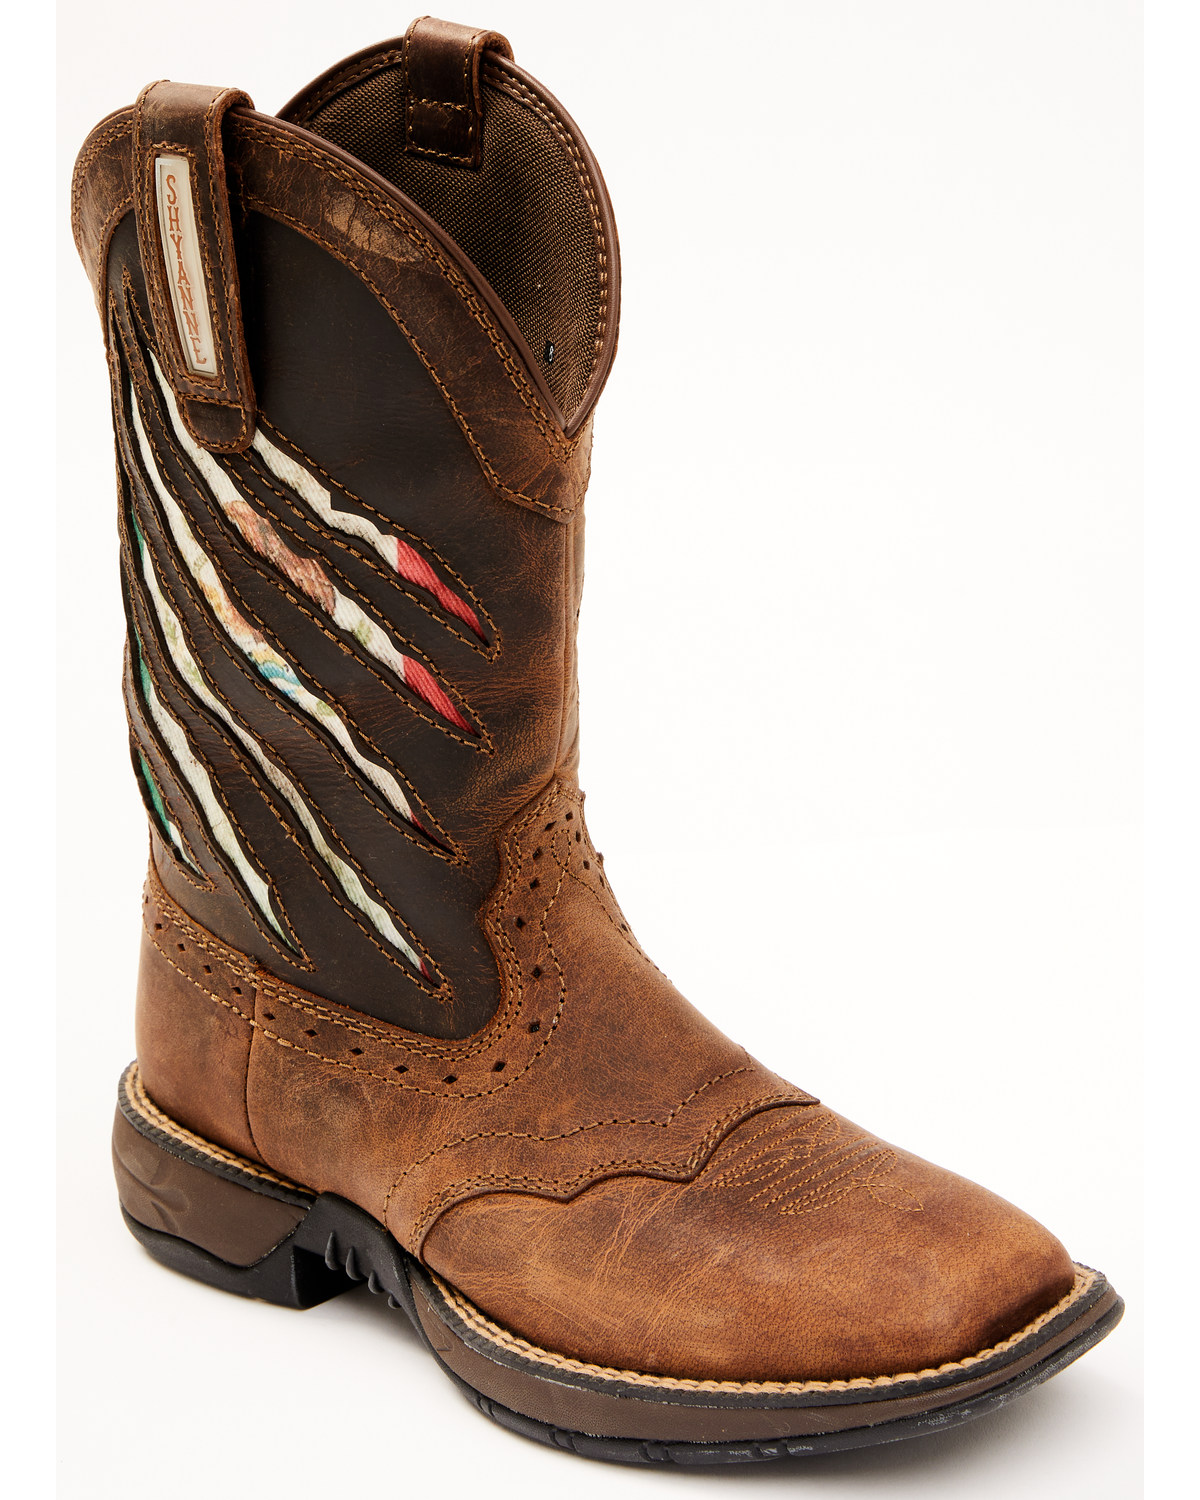 Shyanne Women's Xero Gravity Lite Mexican Flag Western Performance Boots - Broad Square Toe